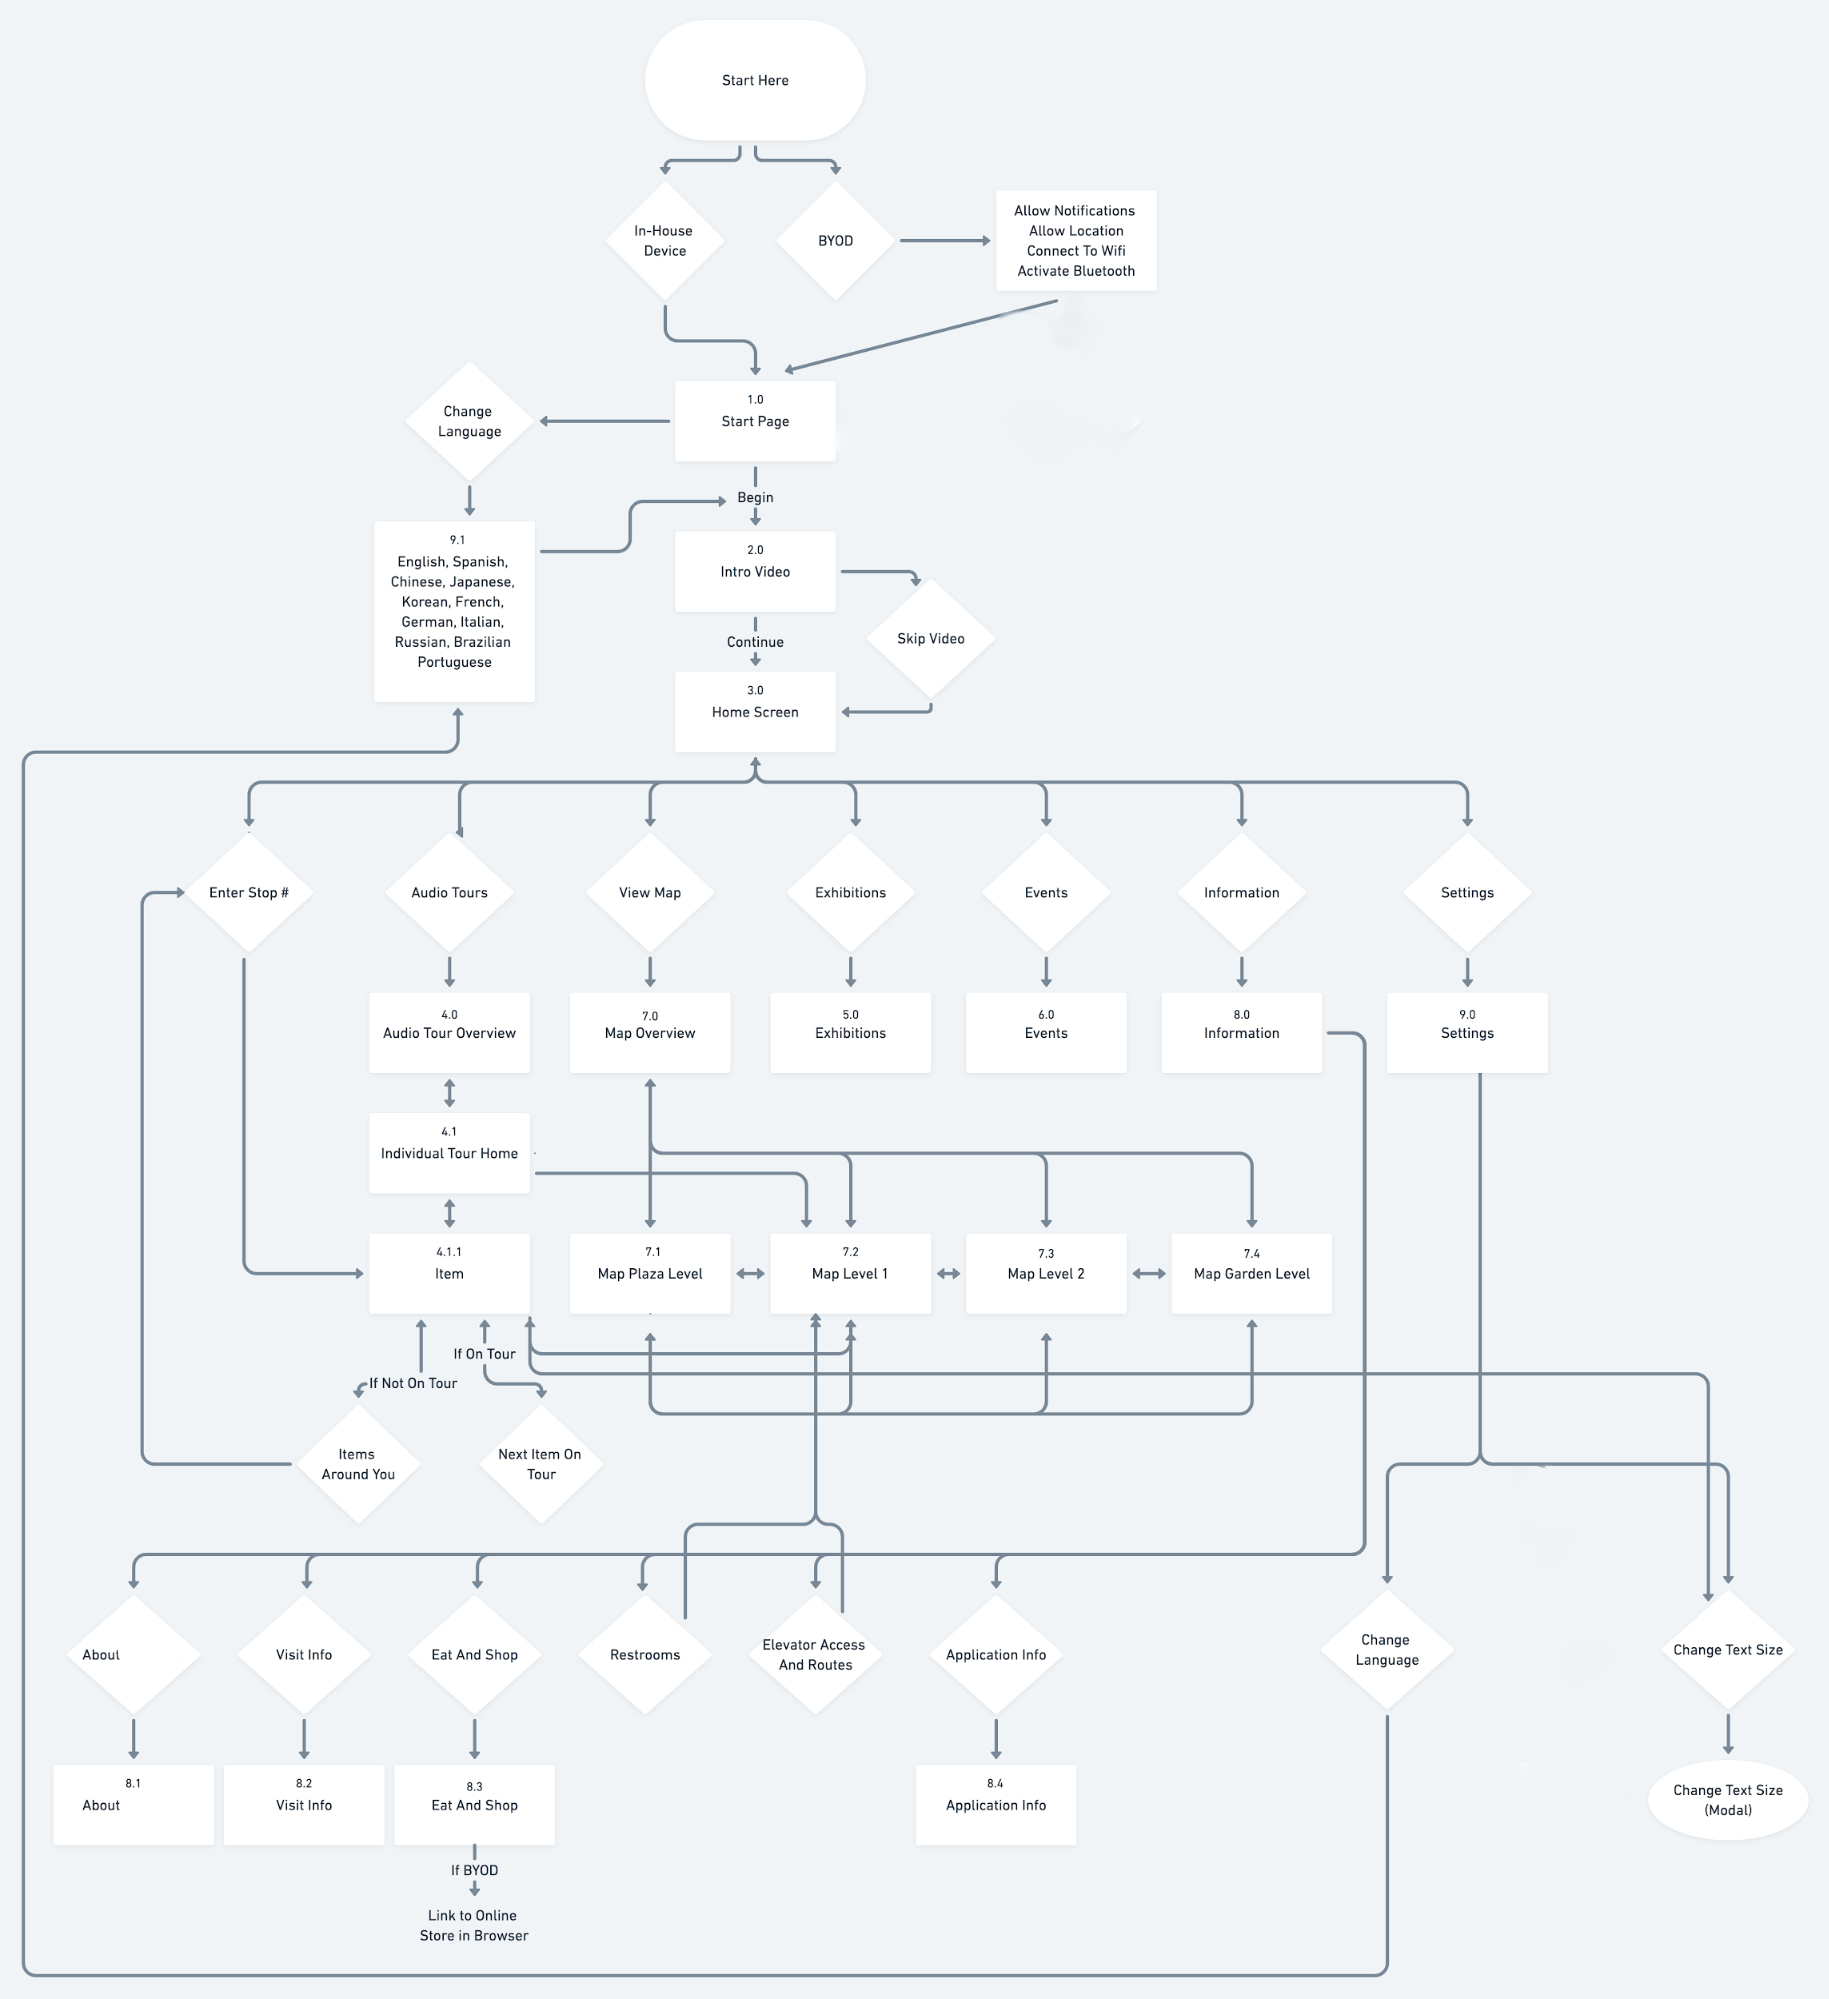 User Flow chart connecting the different pages and interactions of the museum app